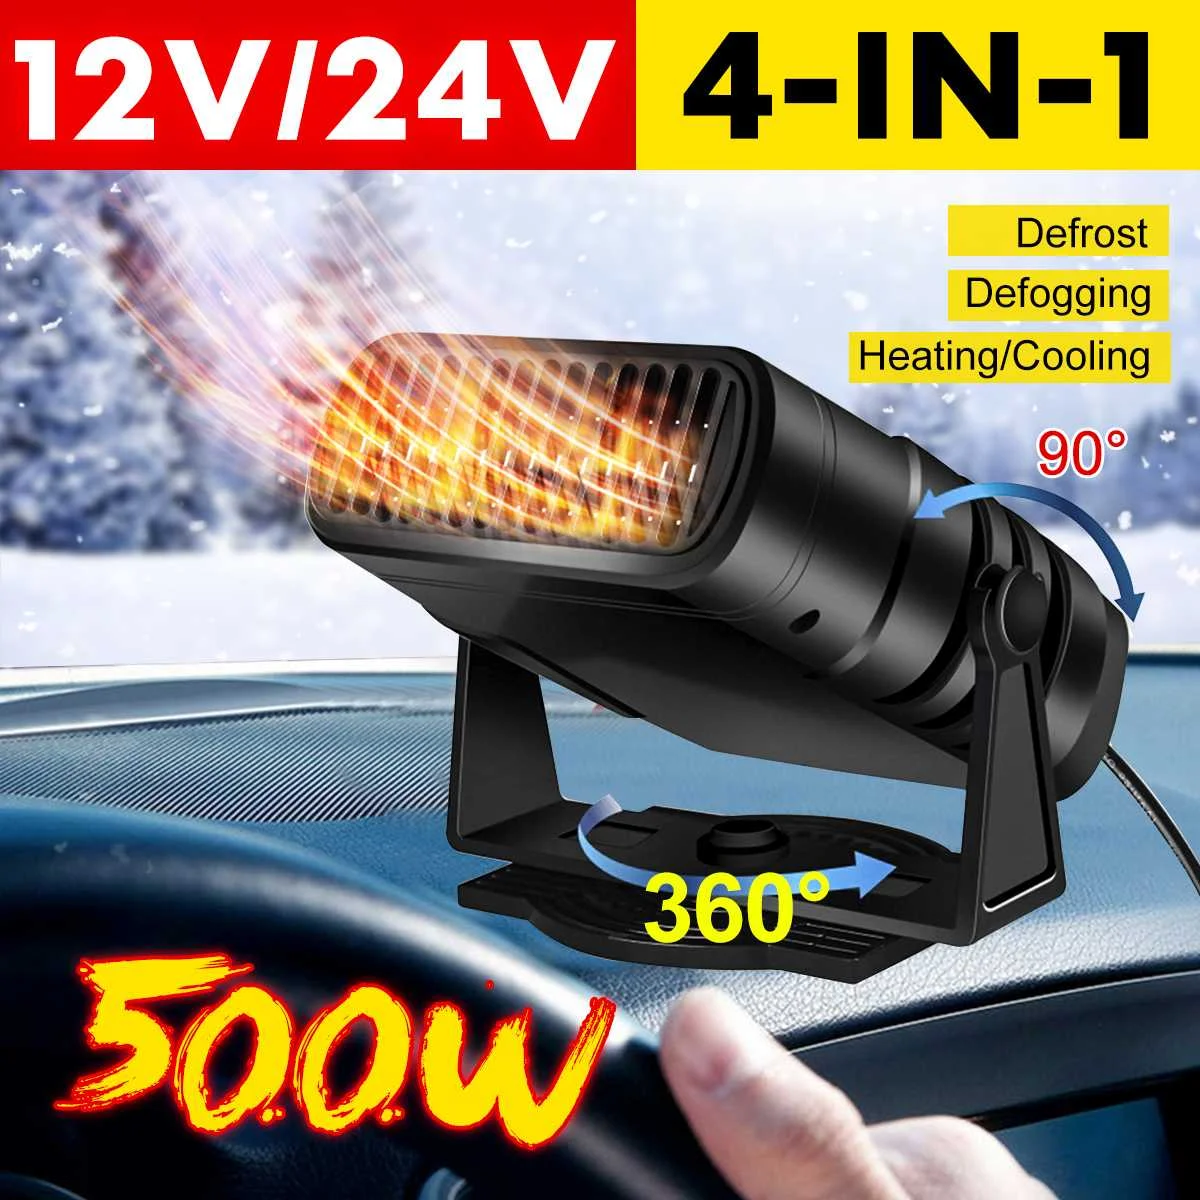 

12V/24V Portable Car Heater 120w Auxiliary Heater Electric Car Cooling Heating Fan Electric Dryer Windshield Demister Defroster